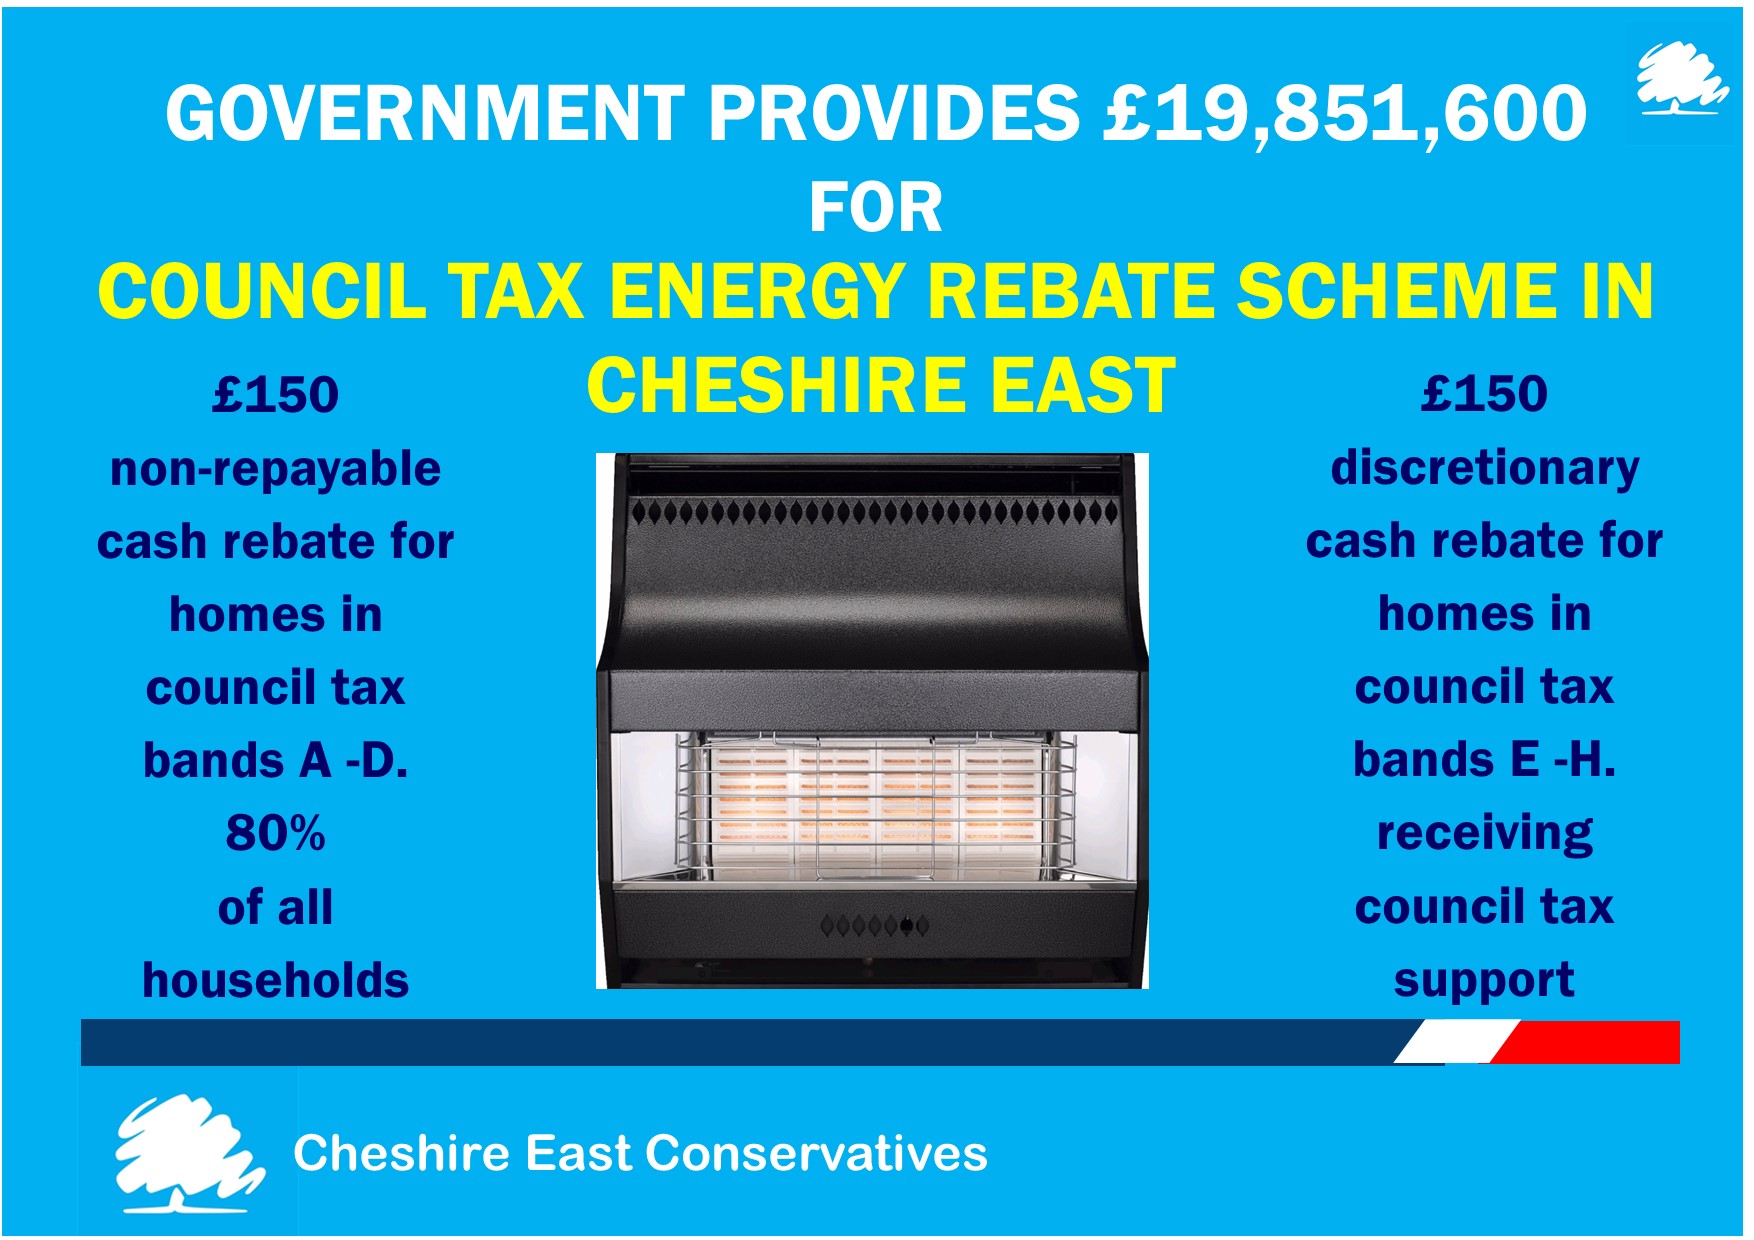 cheshire-east-conservatives-welcome-nearly-20m-for-council-tax-rebate-to-help-families-across